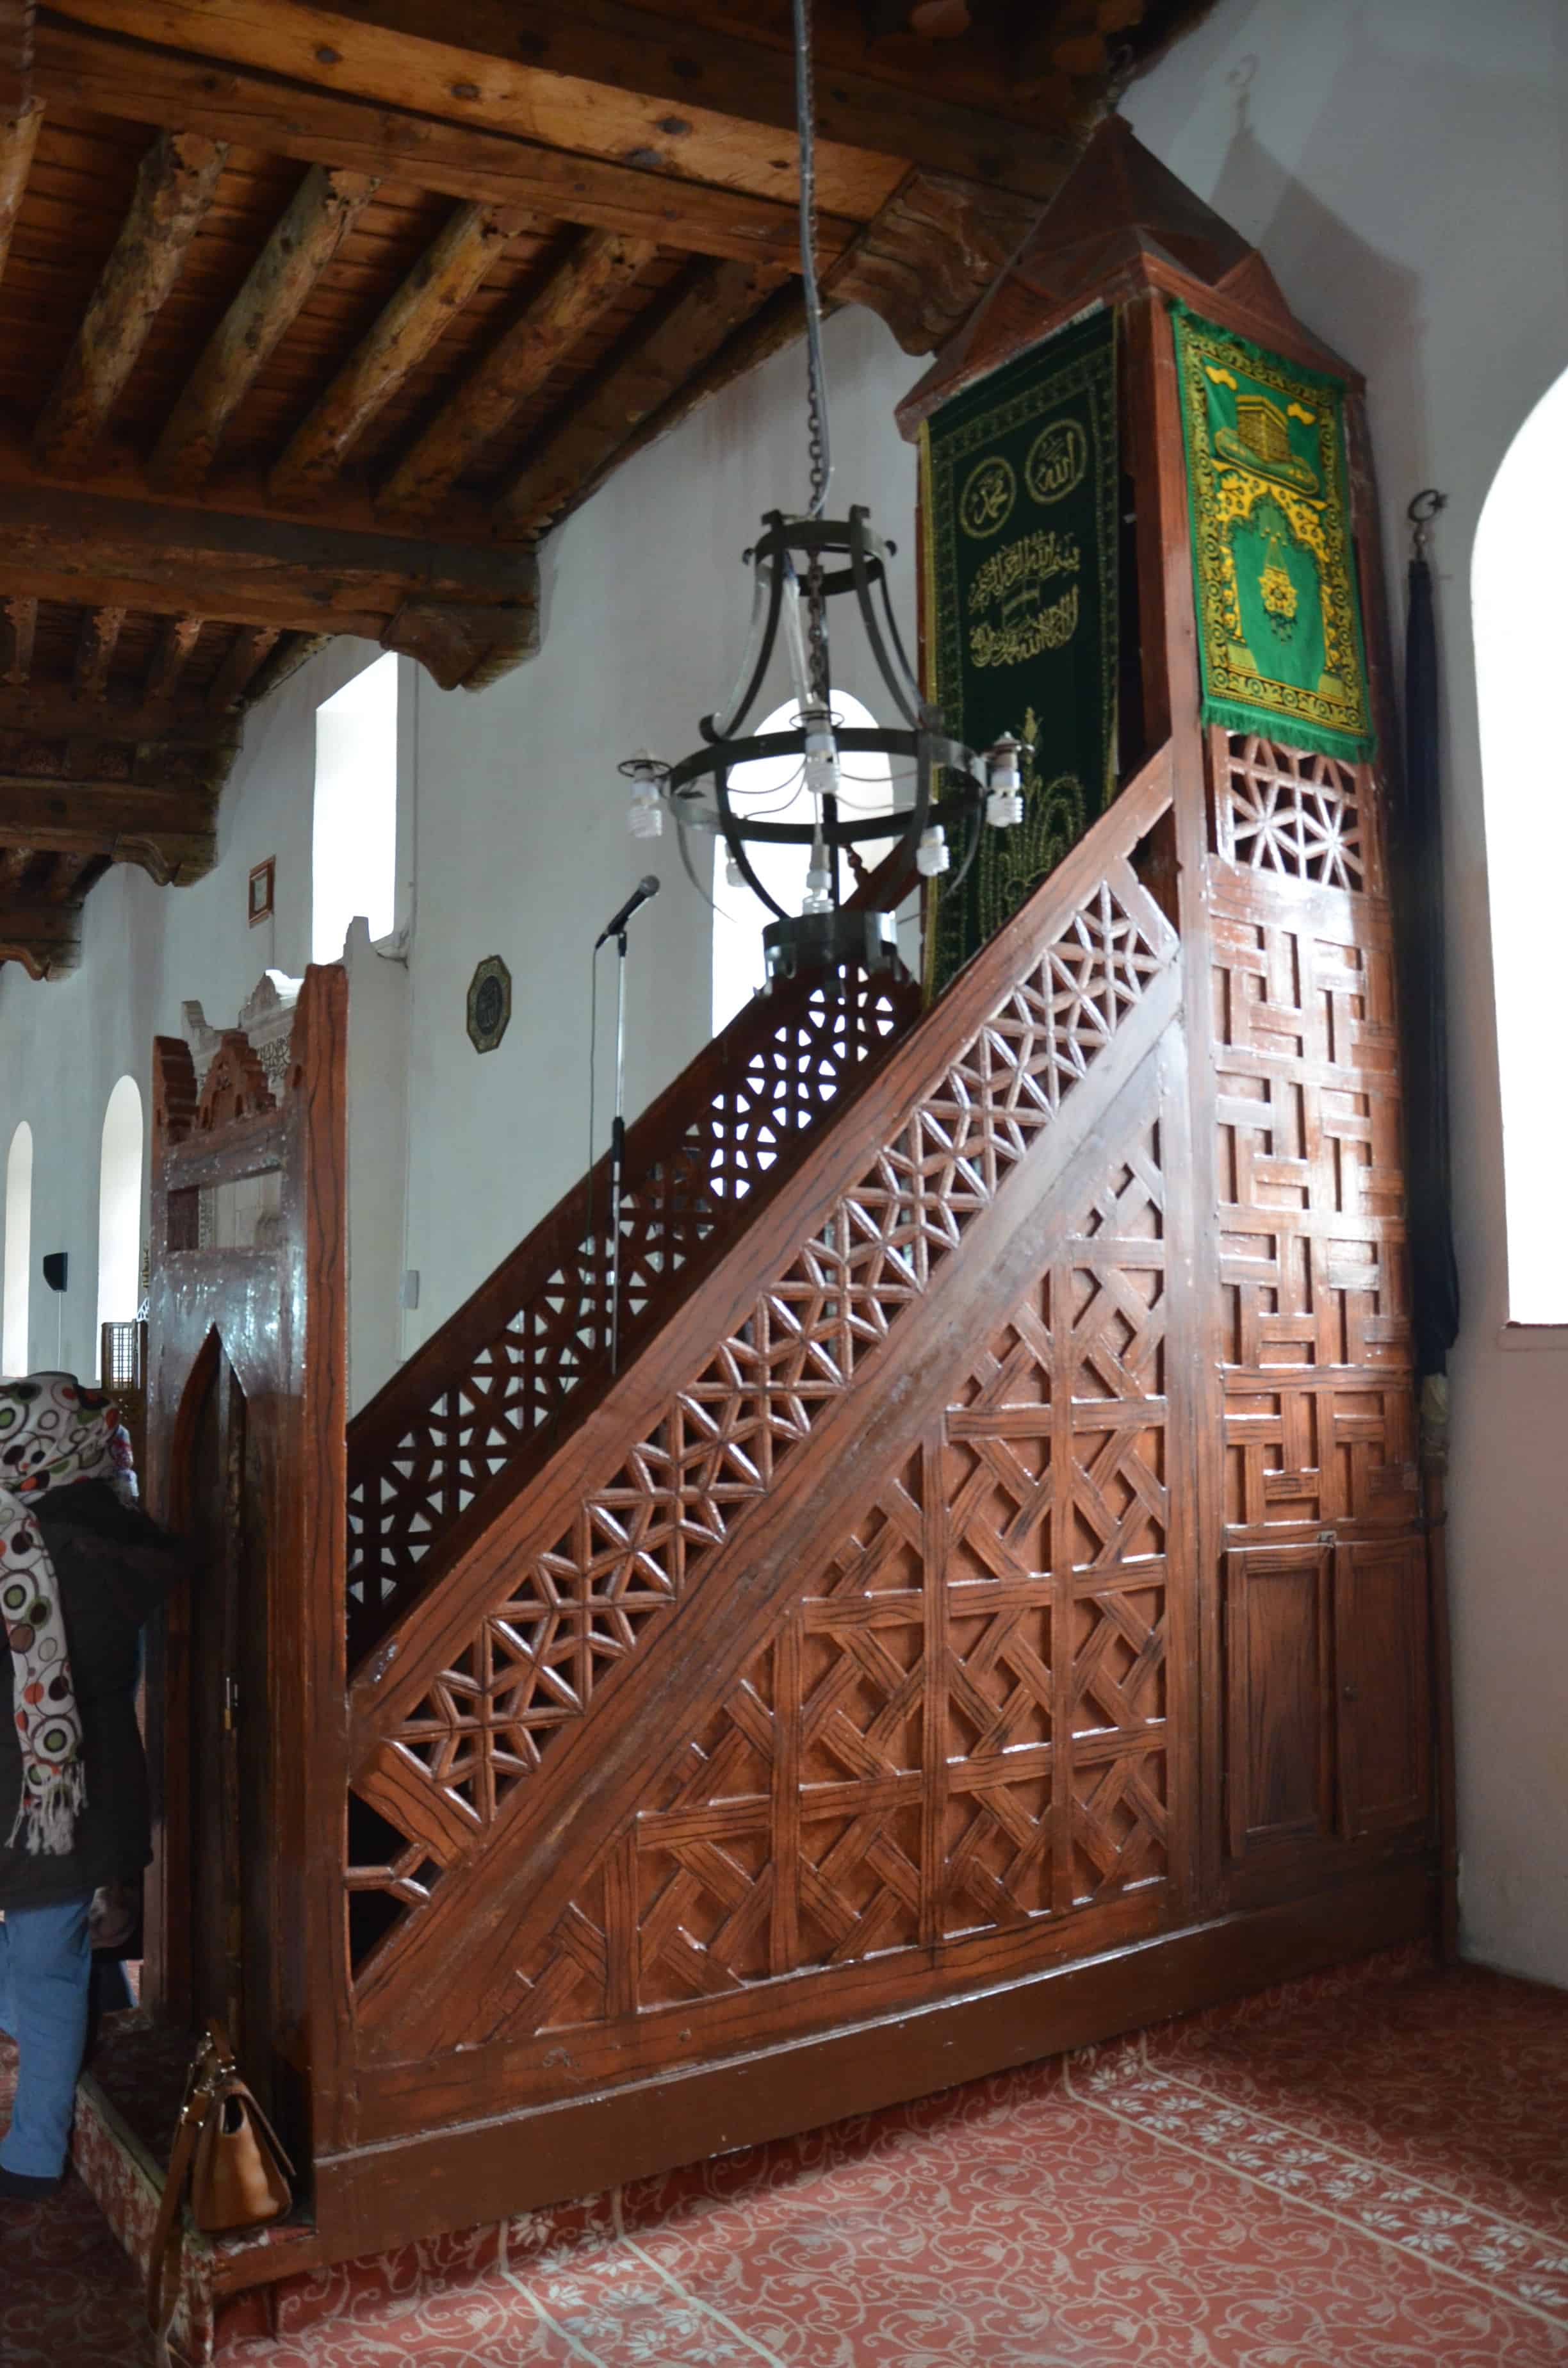 Minbar of the Great Mosque